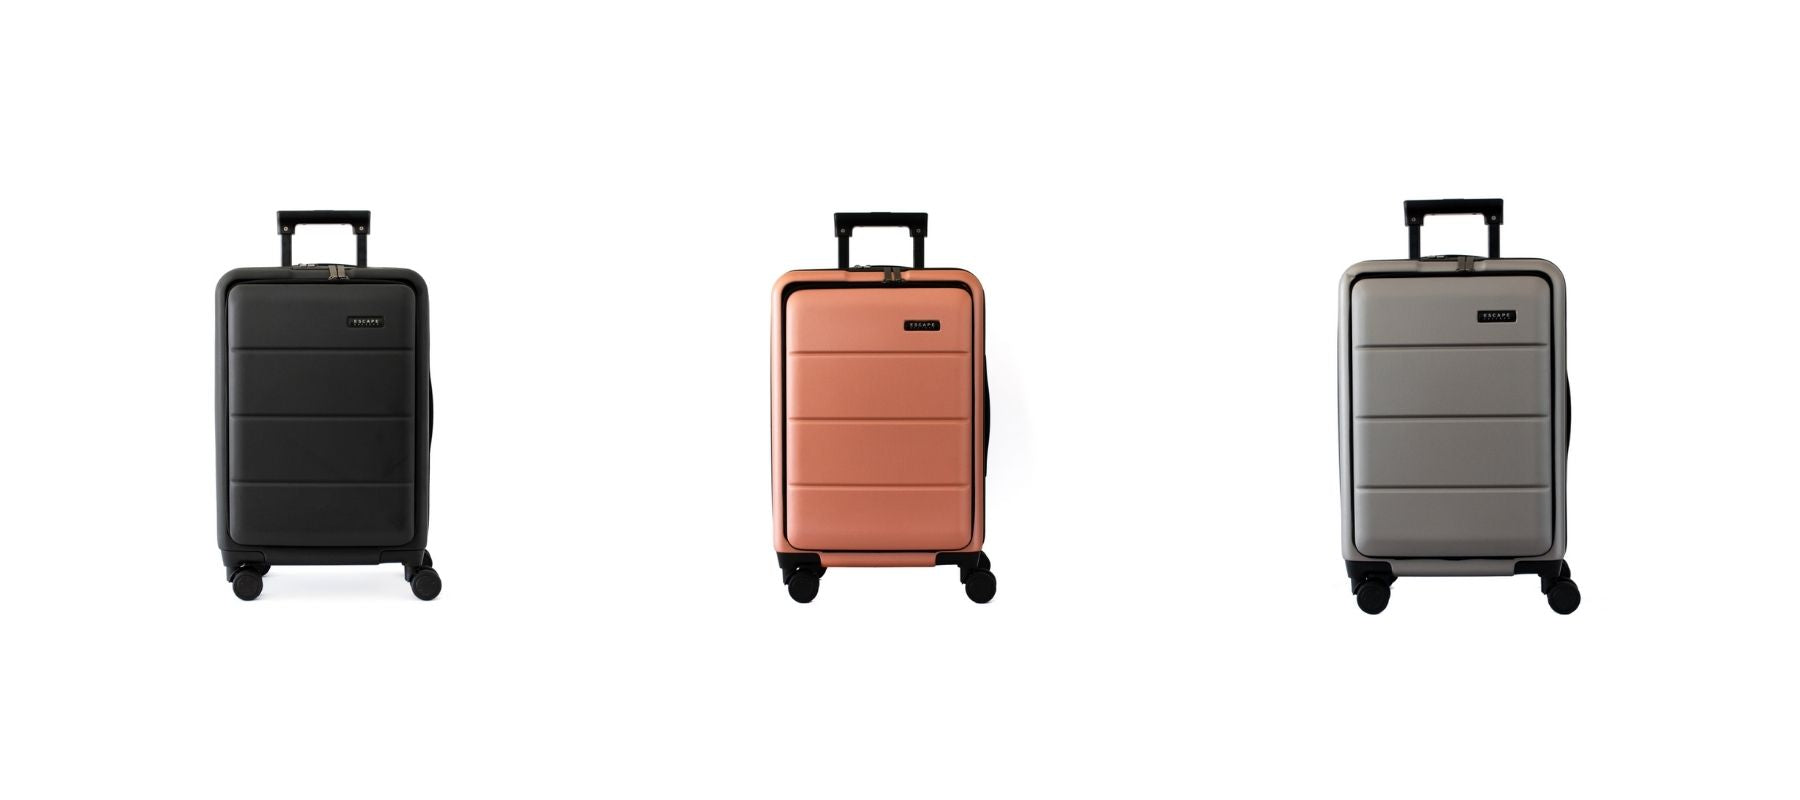 carry-on suitcase